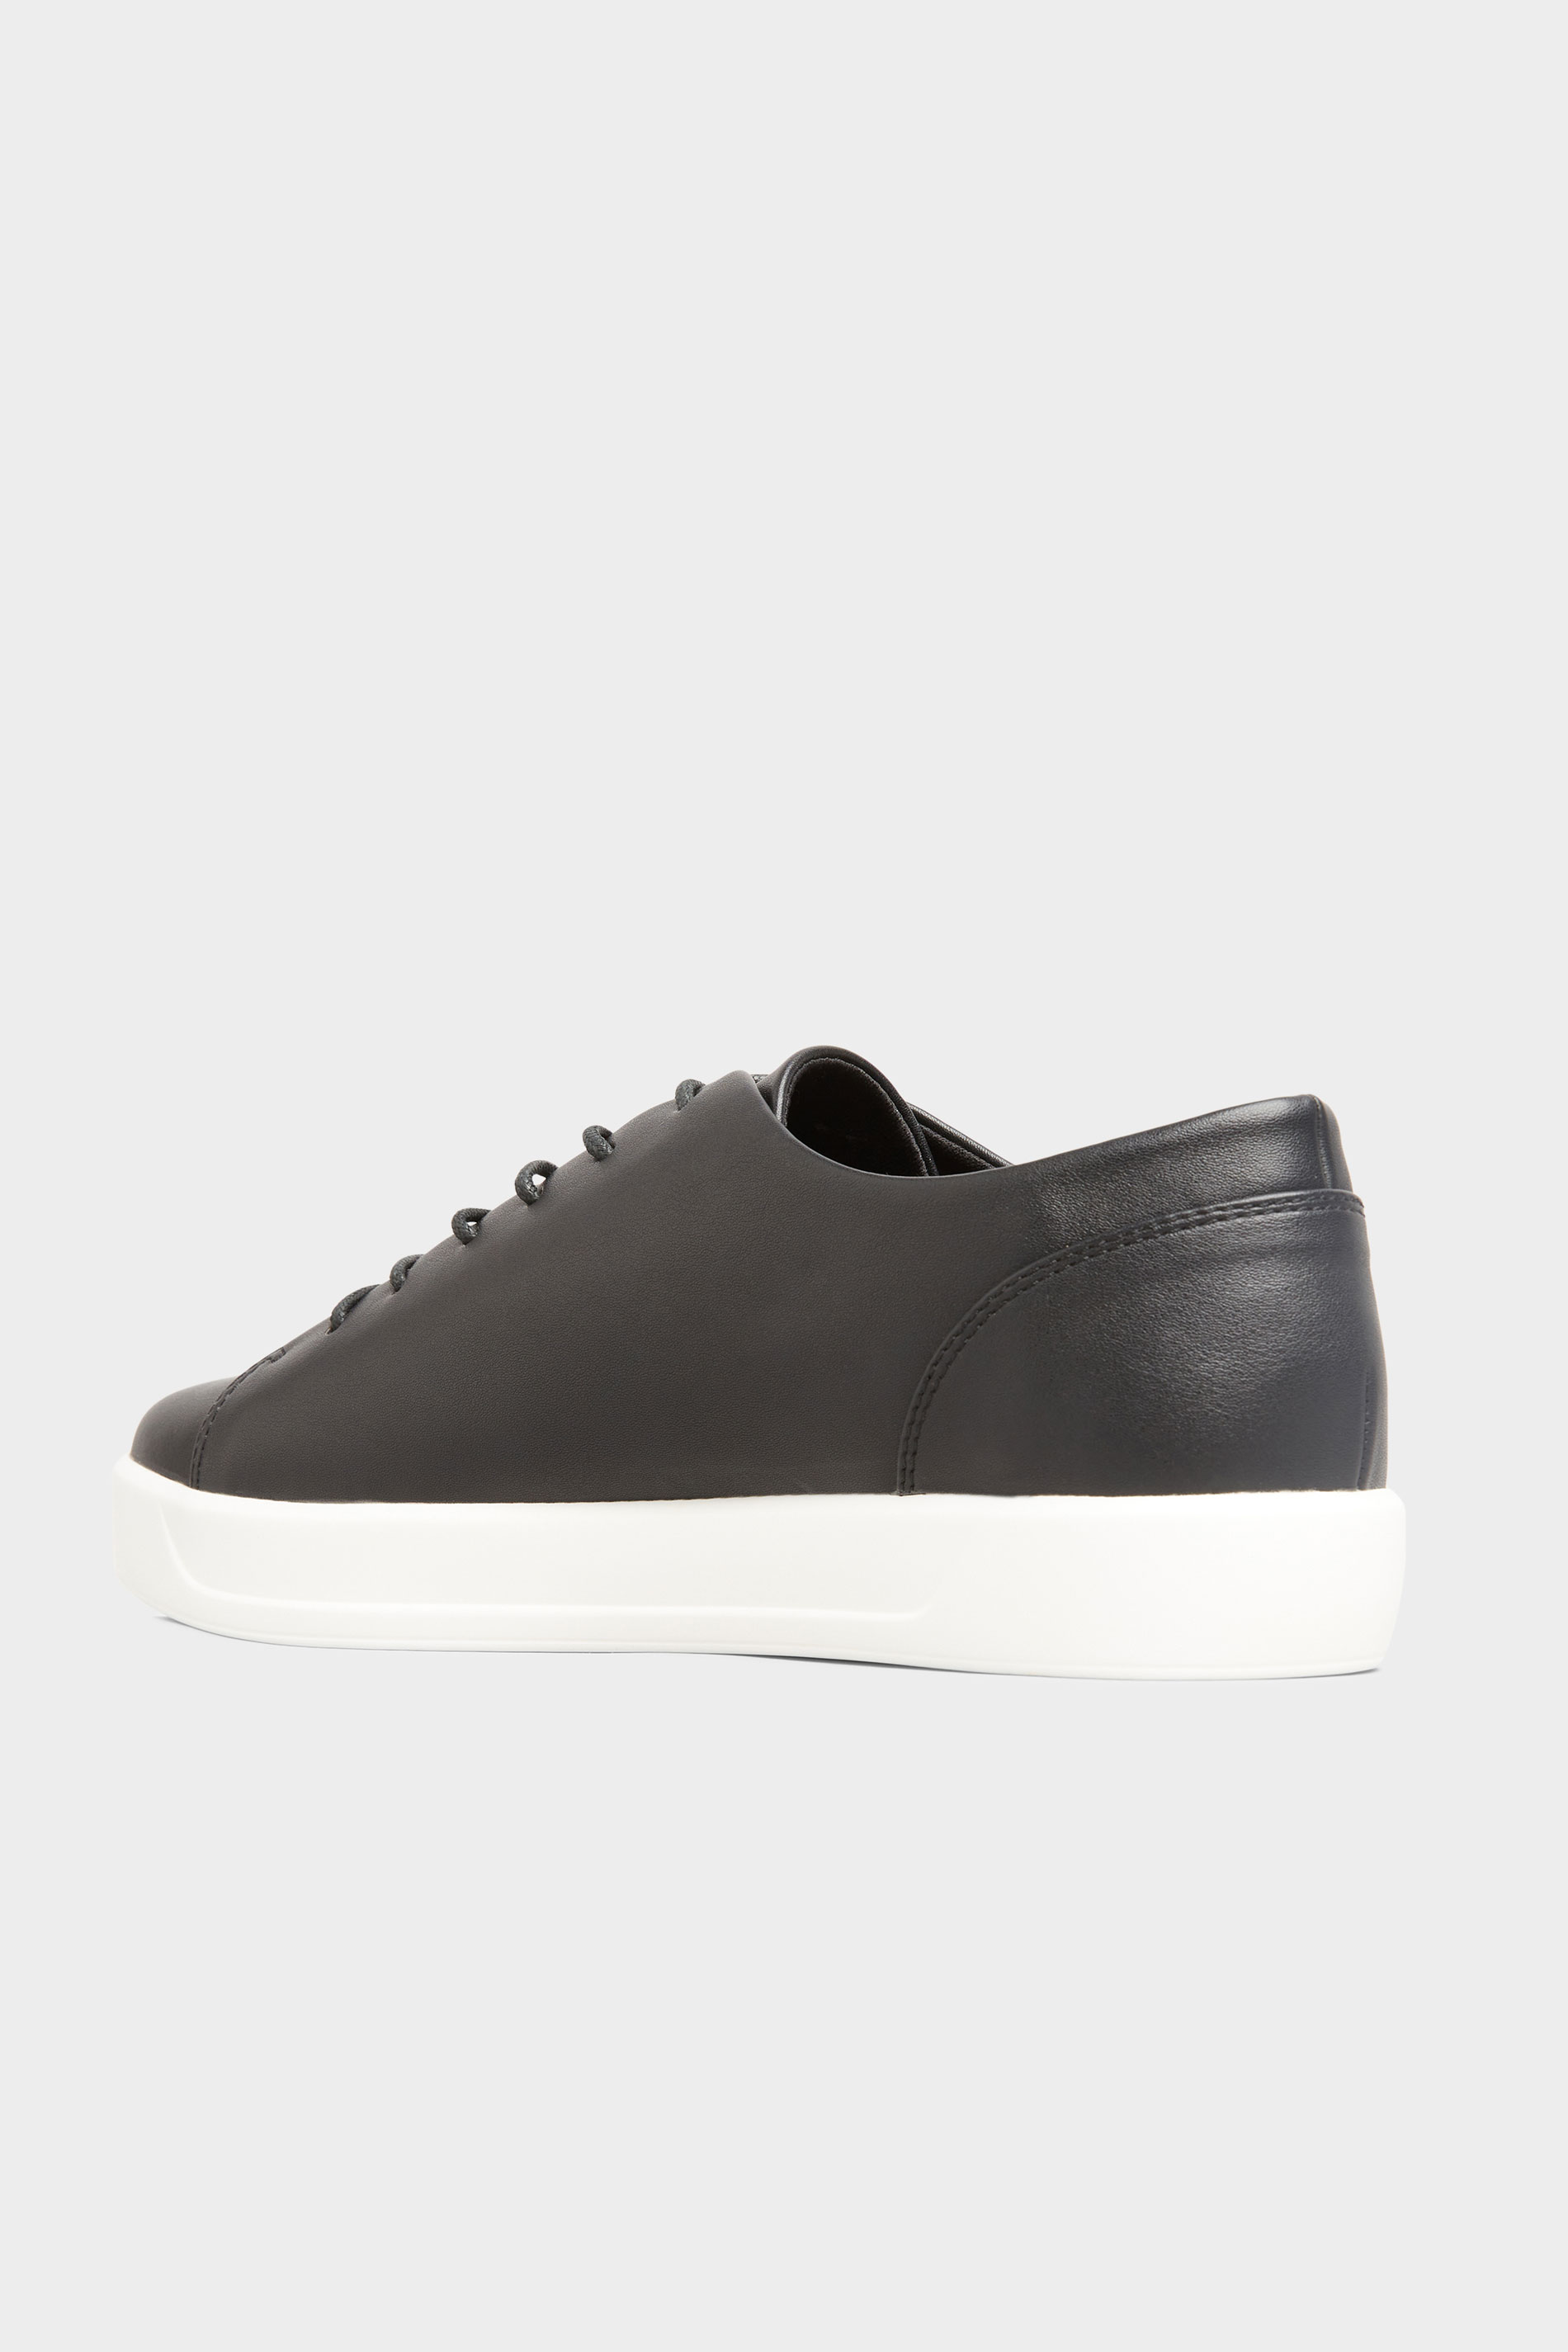 Black Vegan Leather Basic Trainers In Extra Wide Fit | Long Tall Sally